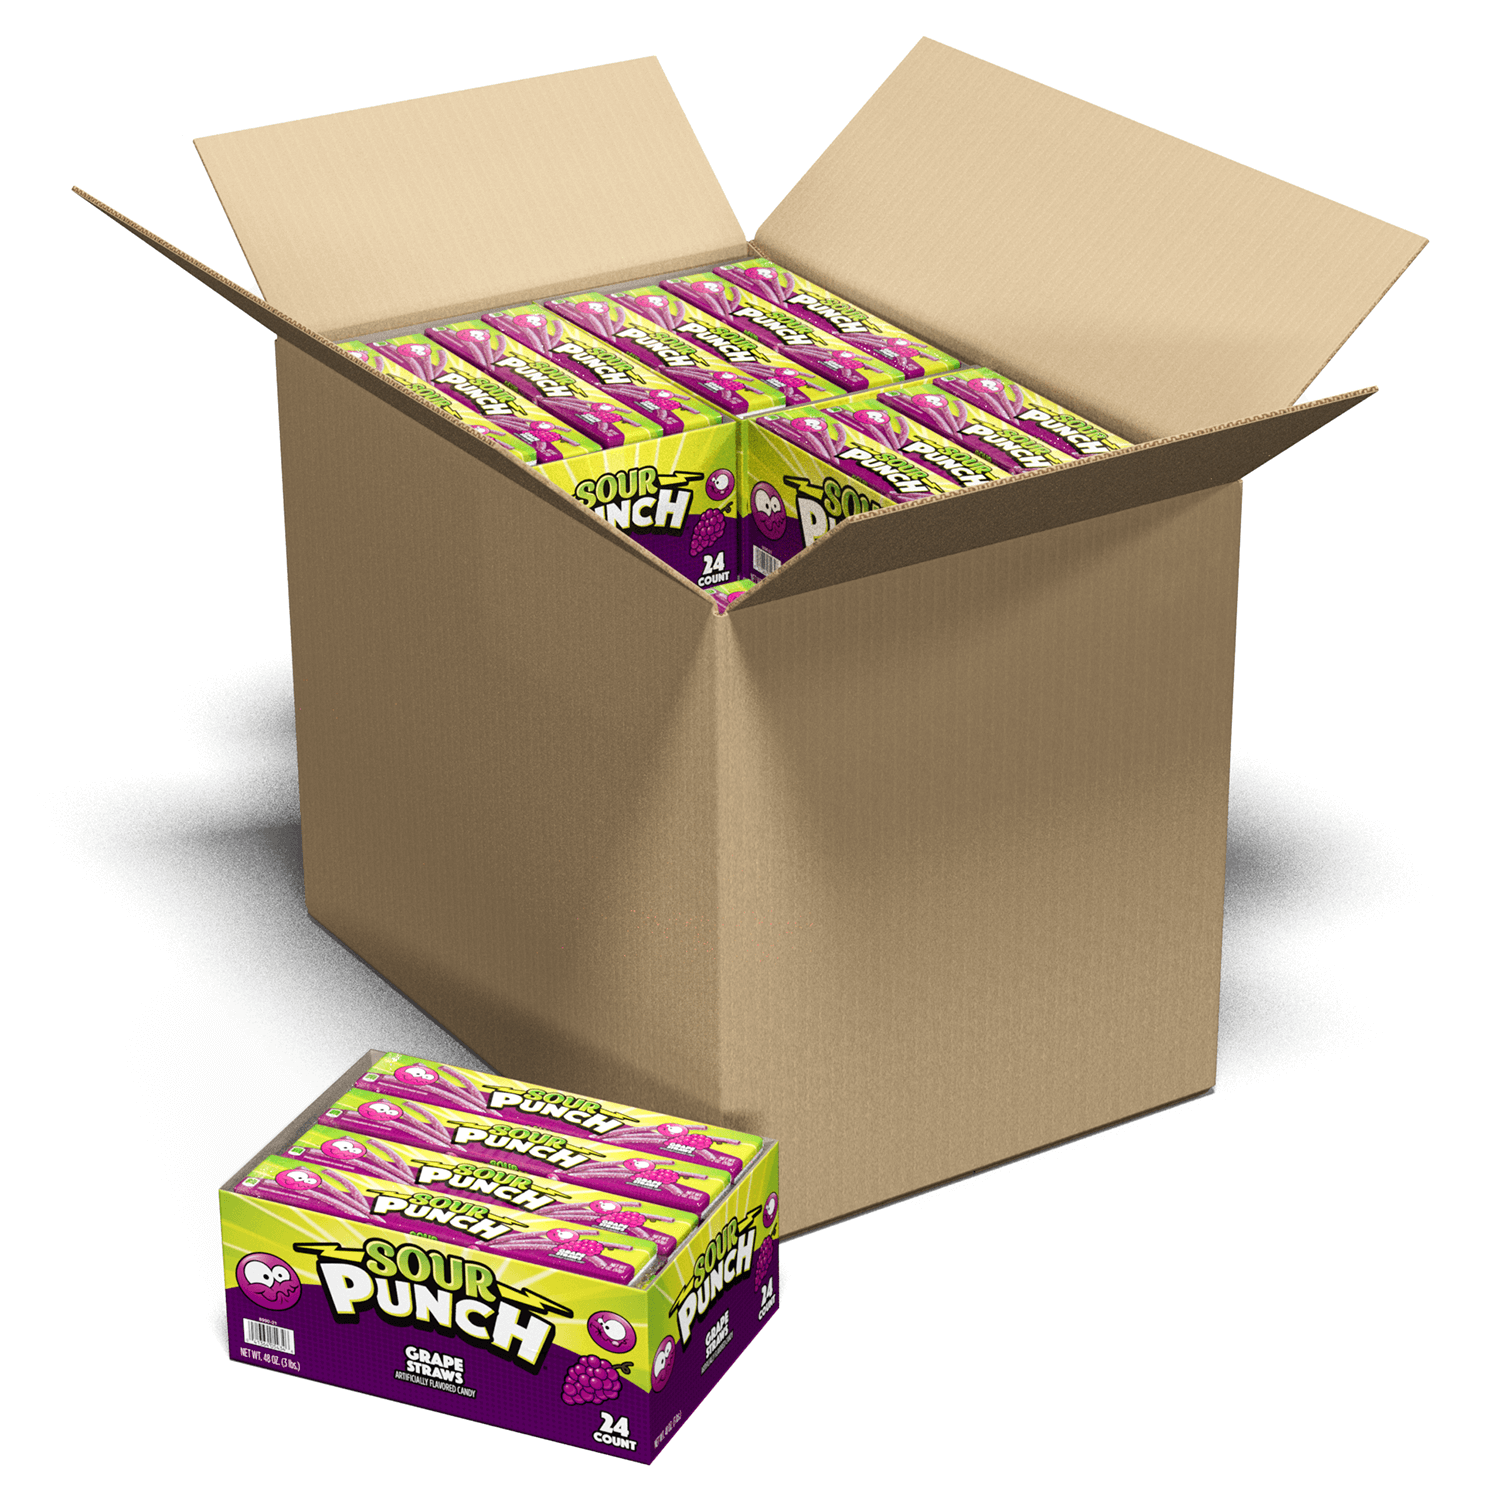 Bulk candy case of Sour Punch Grape 2oz Trays - 12 caddies in a box